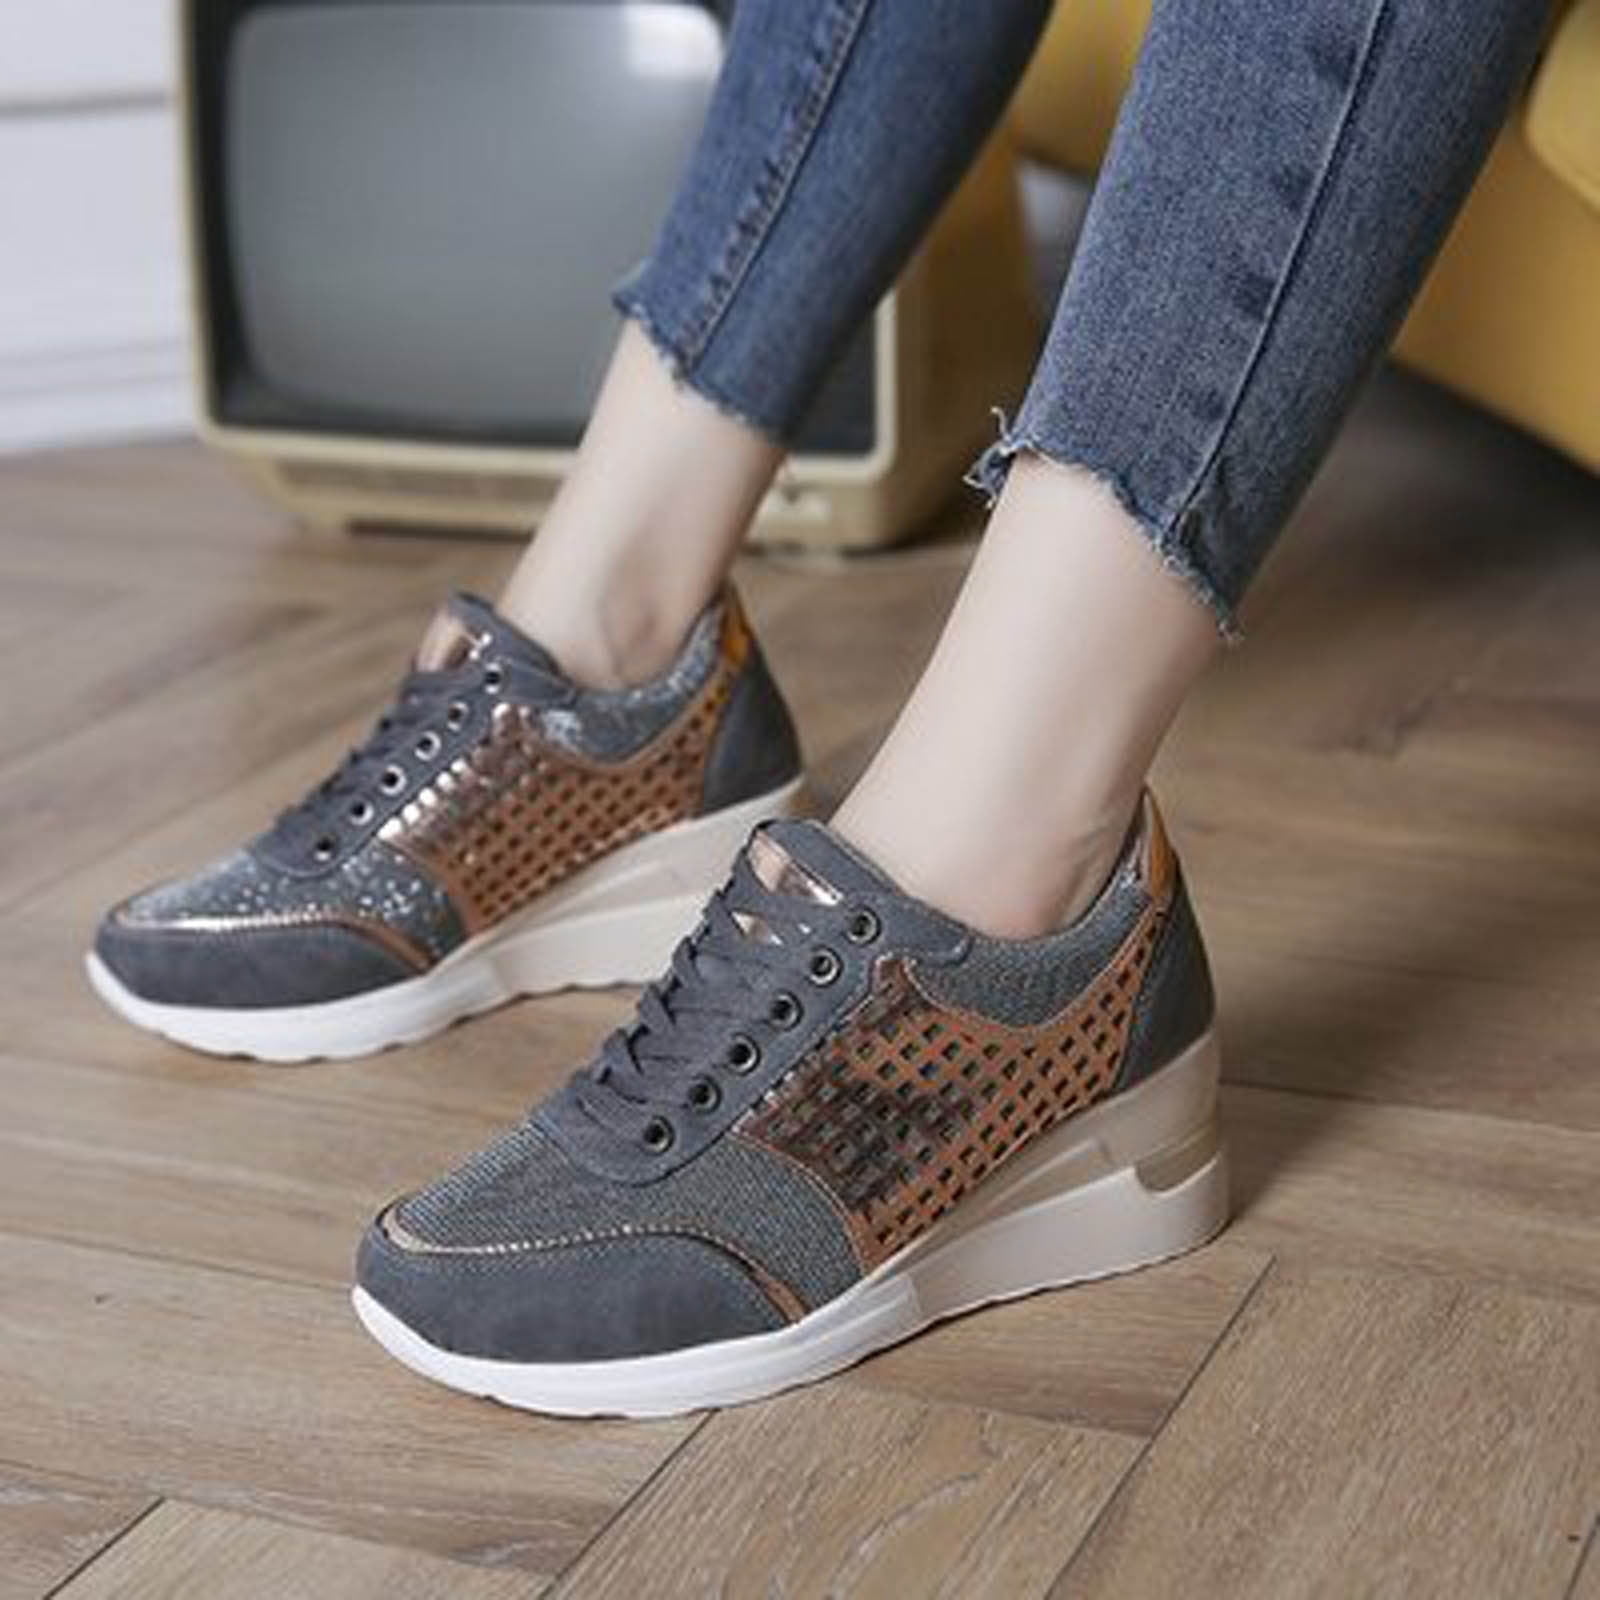 Womens Star Retro Sneakers Lace Up Low Wedge Heel Chic Comforts Shoes Autumn 